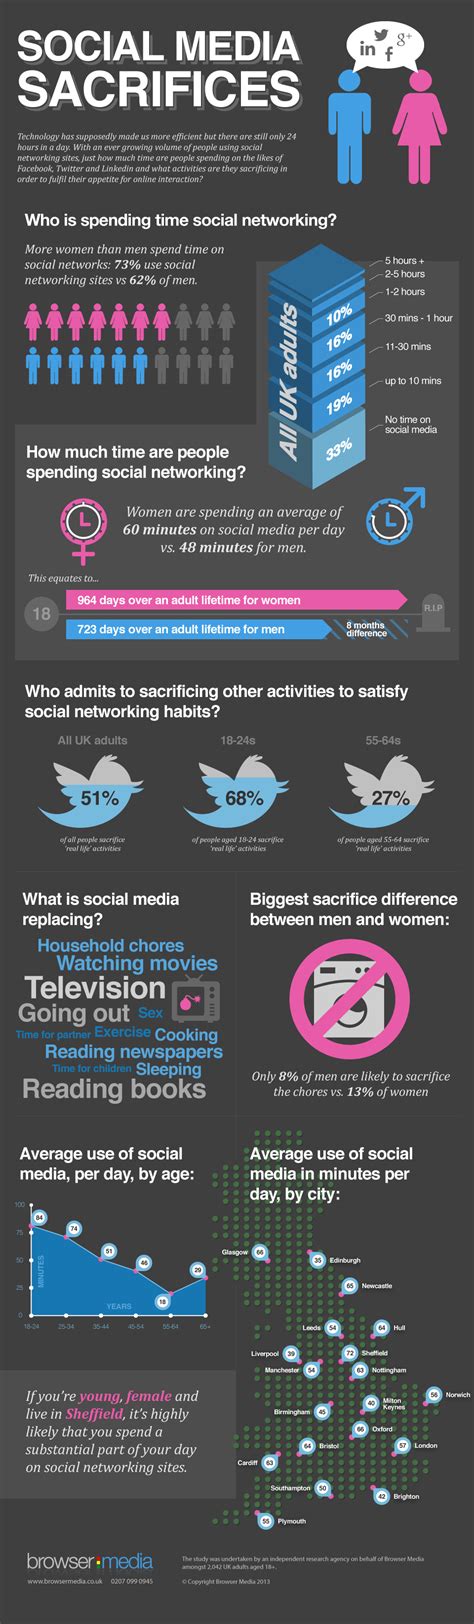 Are You Giving Up Sex For Your Social Media Fix [infographic] My